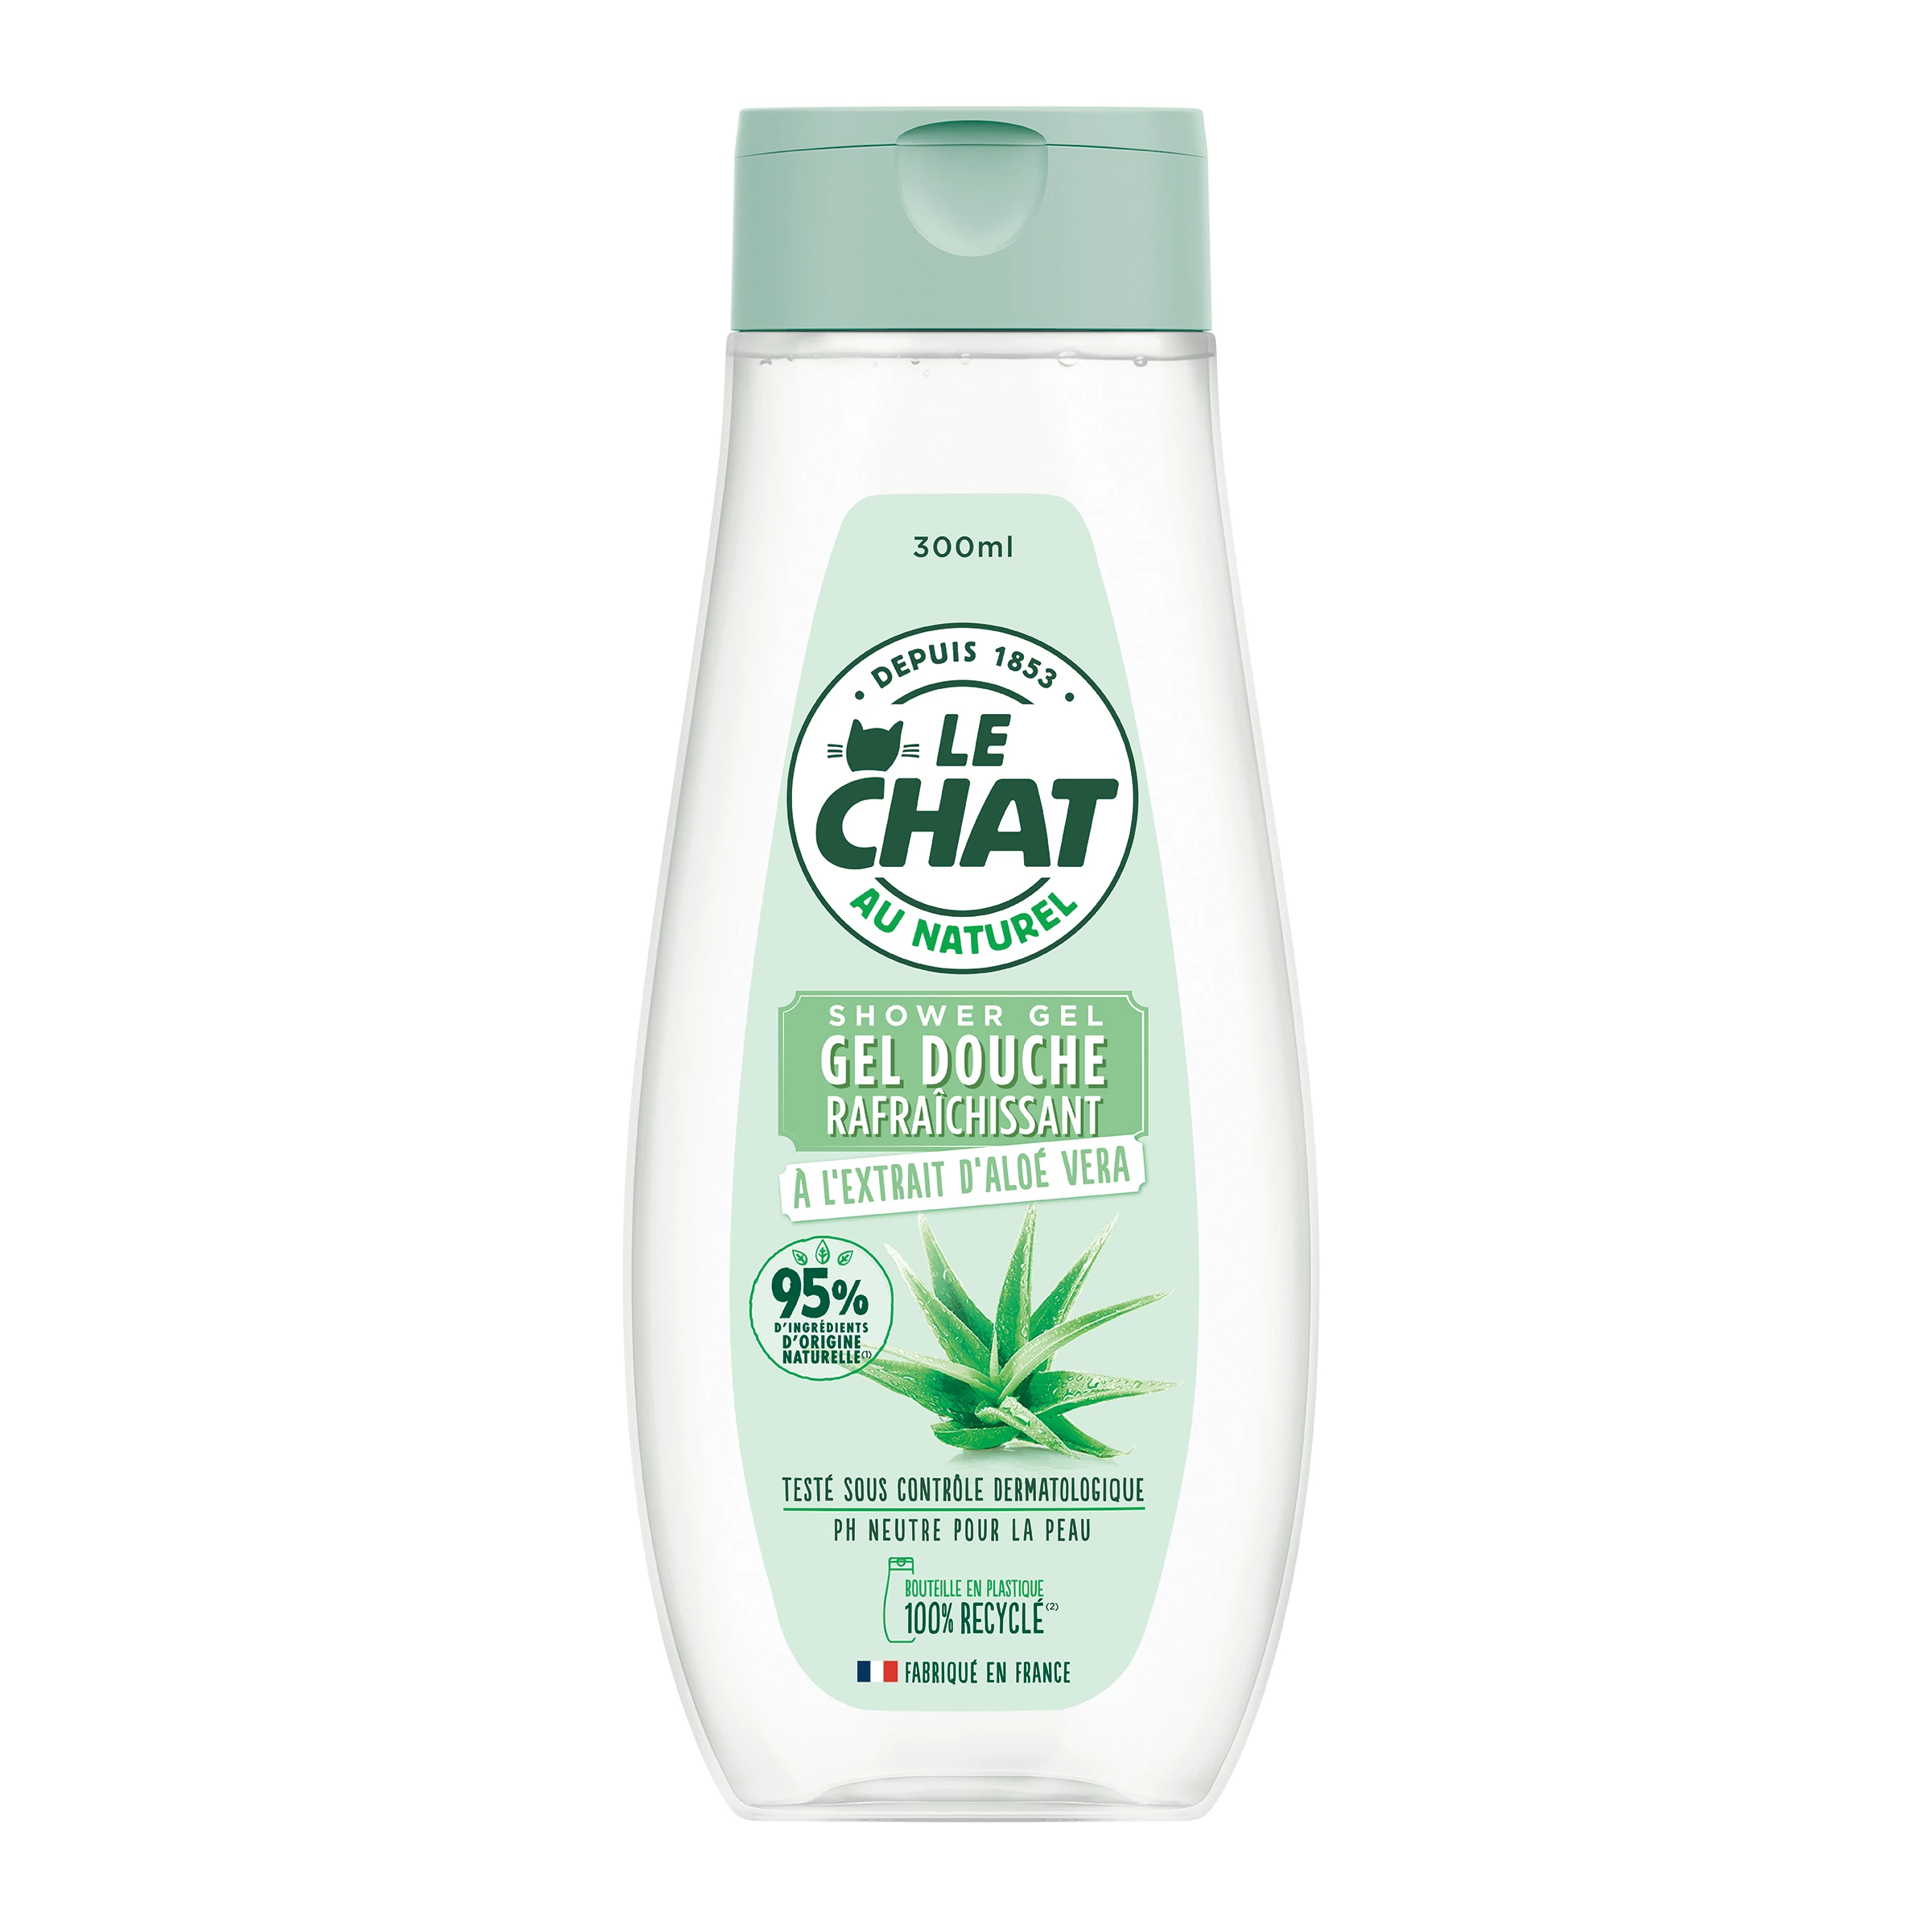 Refreshing shower gel with aloe vera extract 300ml - LE CHAT